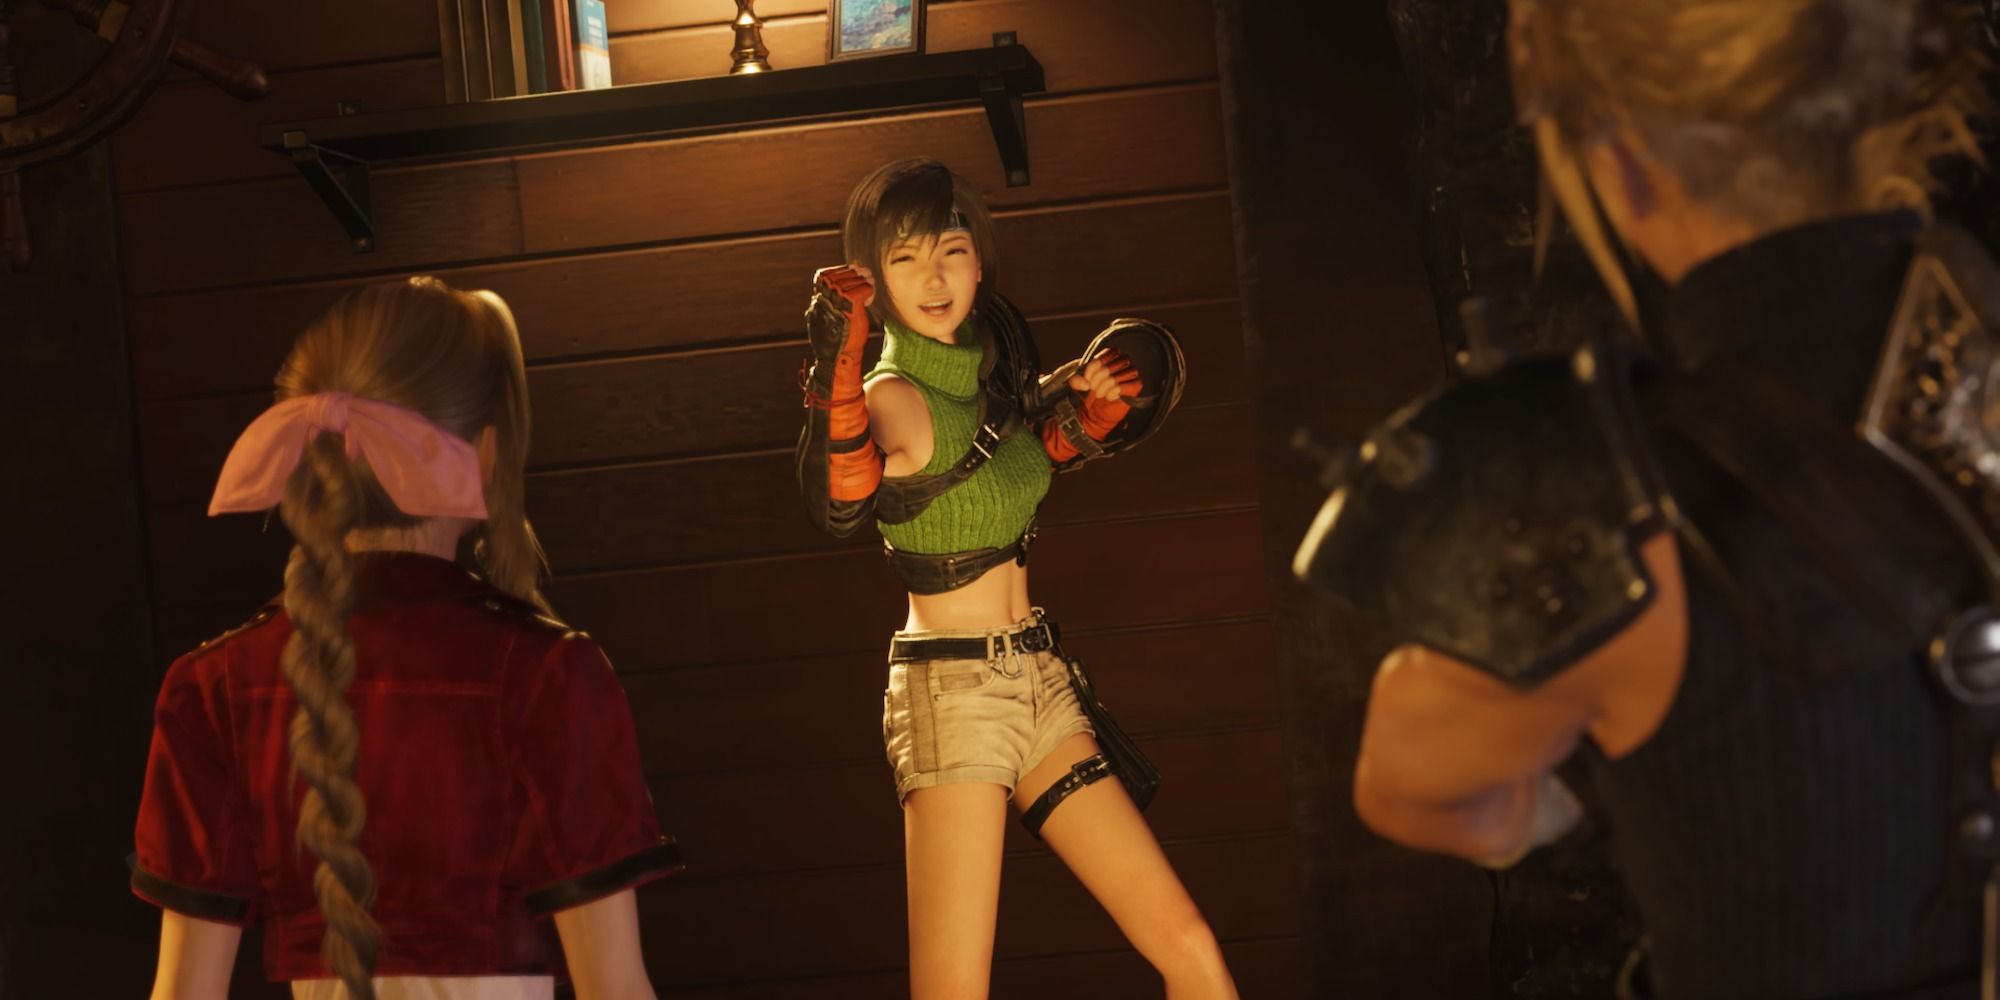 Yuffie giving a pose to Cloud and Aerith